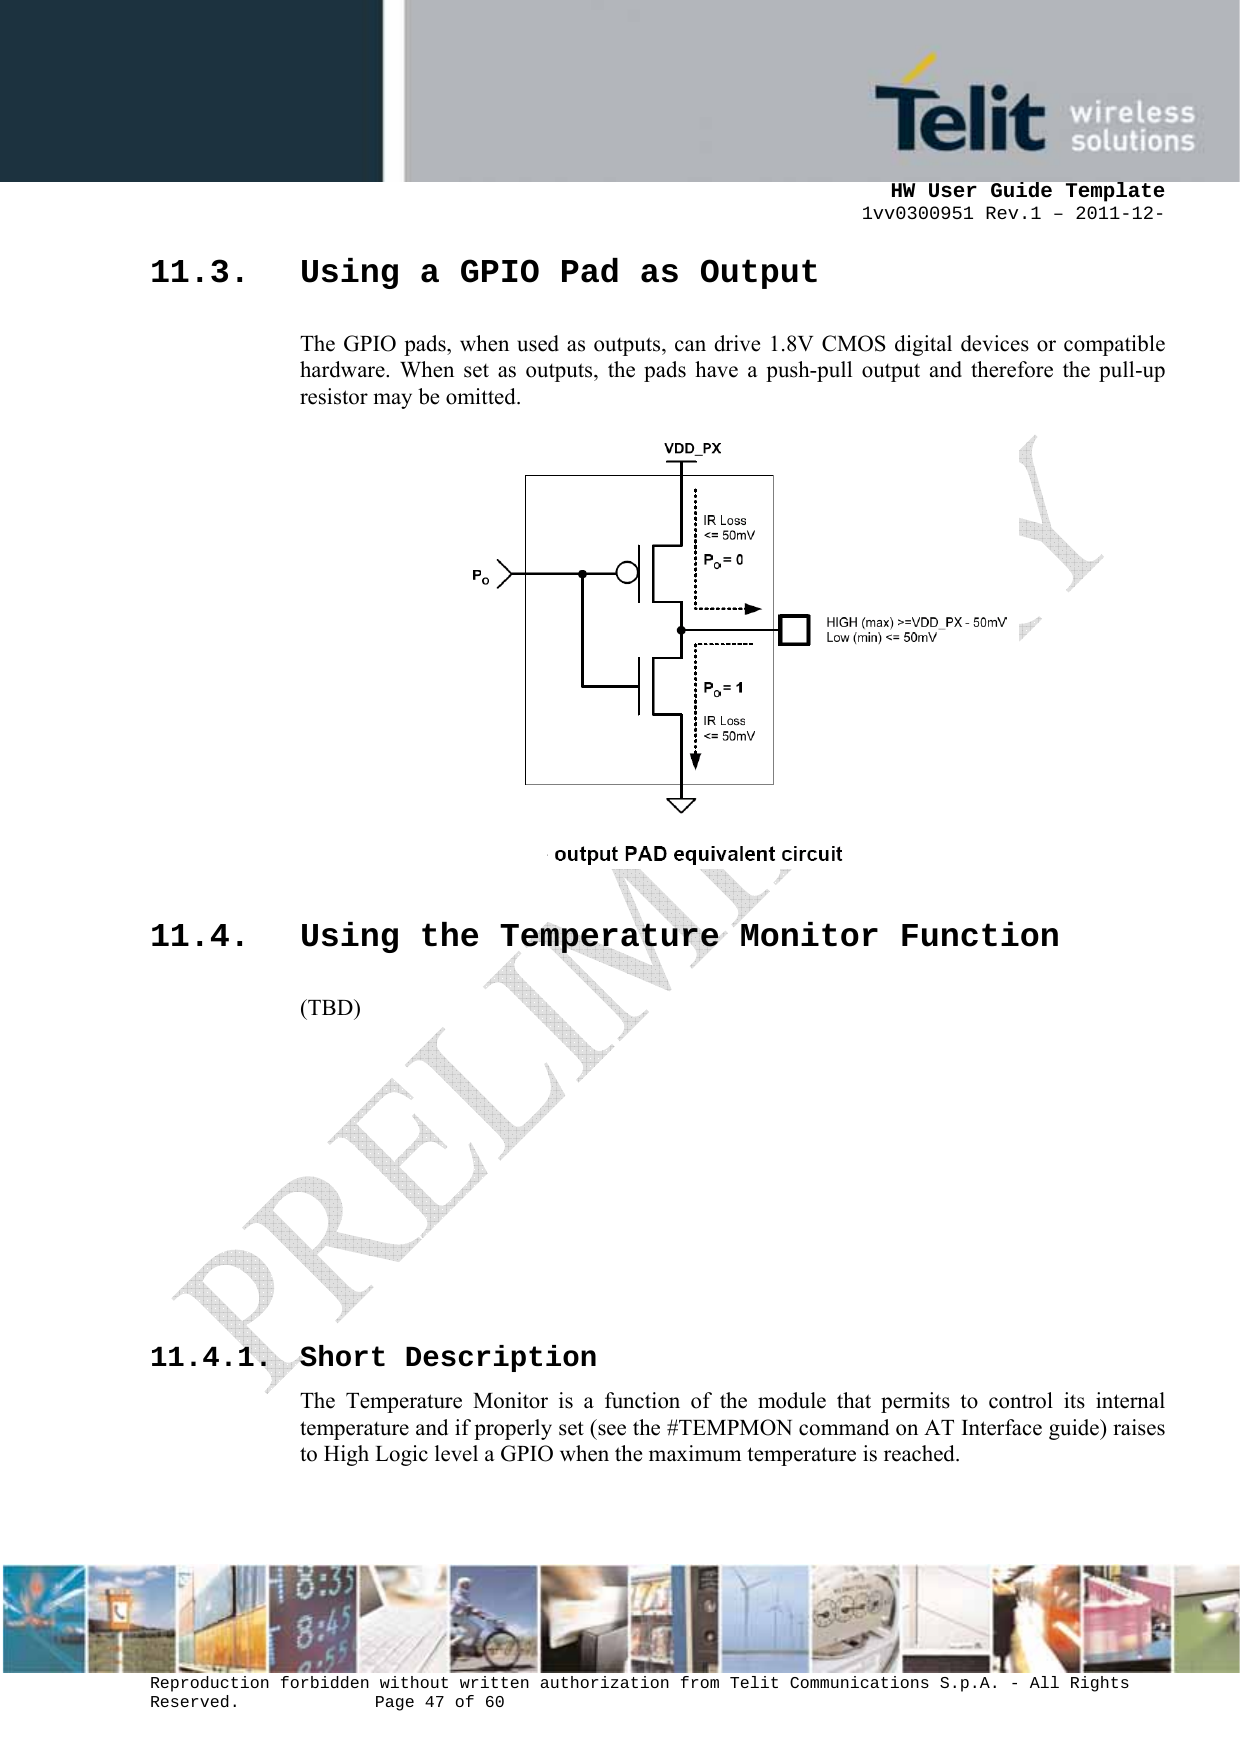      HW User Guide Template 1vv0300951 Rev.1 – 2011-12-  Reproduction forbidden without written authorization from Telit Communications S.p.A. - All Rights Reserved.    Page 47 of 60                                                     11.3. Using a GPIO Pad as Output The GPIO pads, when used as outputs, can drive 1.8V CMOS digital devices or compatible hardware. When set as outputs, the pads have a push-pull output and therefore the pull-up resistor may be omitted.  11.4. Using the Temperature Monitor Function (TBD)        11.4.1. Short Description The Temperature Monitor is a function of the module that permits to control its internal temperature and if properly set (see the #TEMPMON command on AT Interface guide) raises to High Logic level a GPIO when the maximum temperature is reached. 